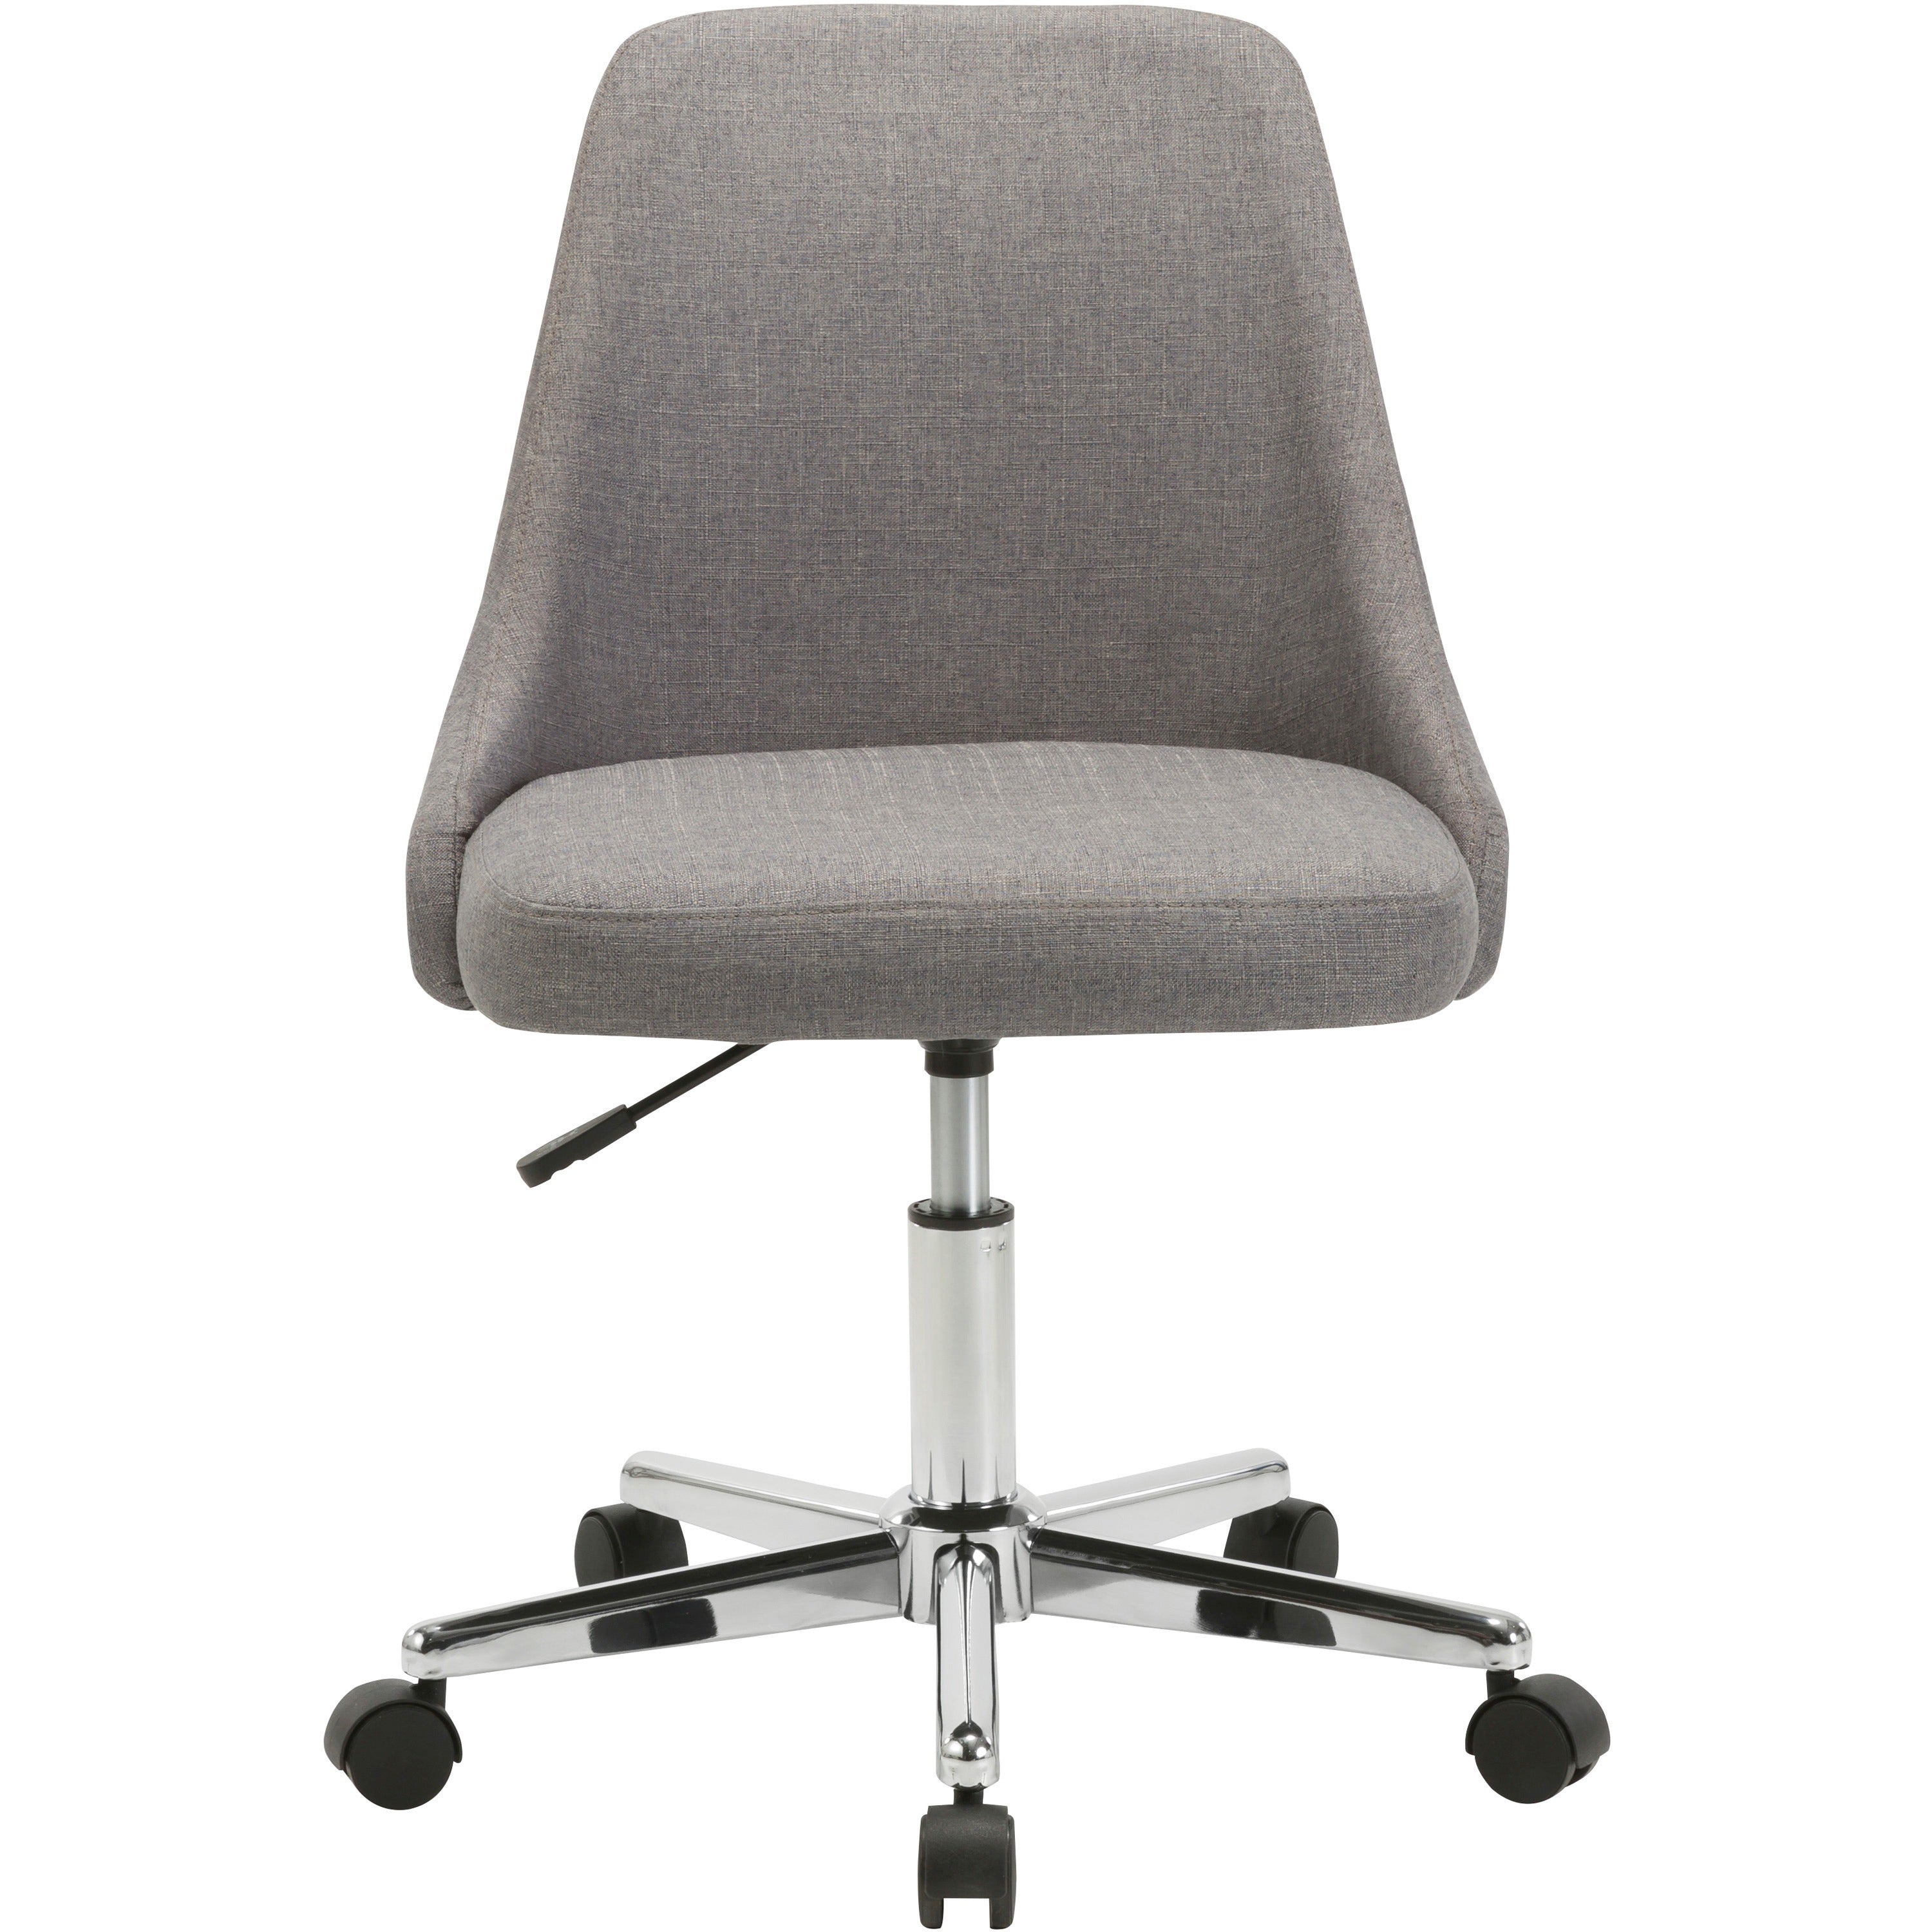 Lorell Resimercial Low-back Task Chair with Arms - 22.5" x 24.4"31.5" - Material: Fabric - Finish: Gray - 3